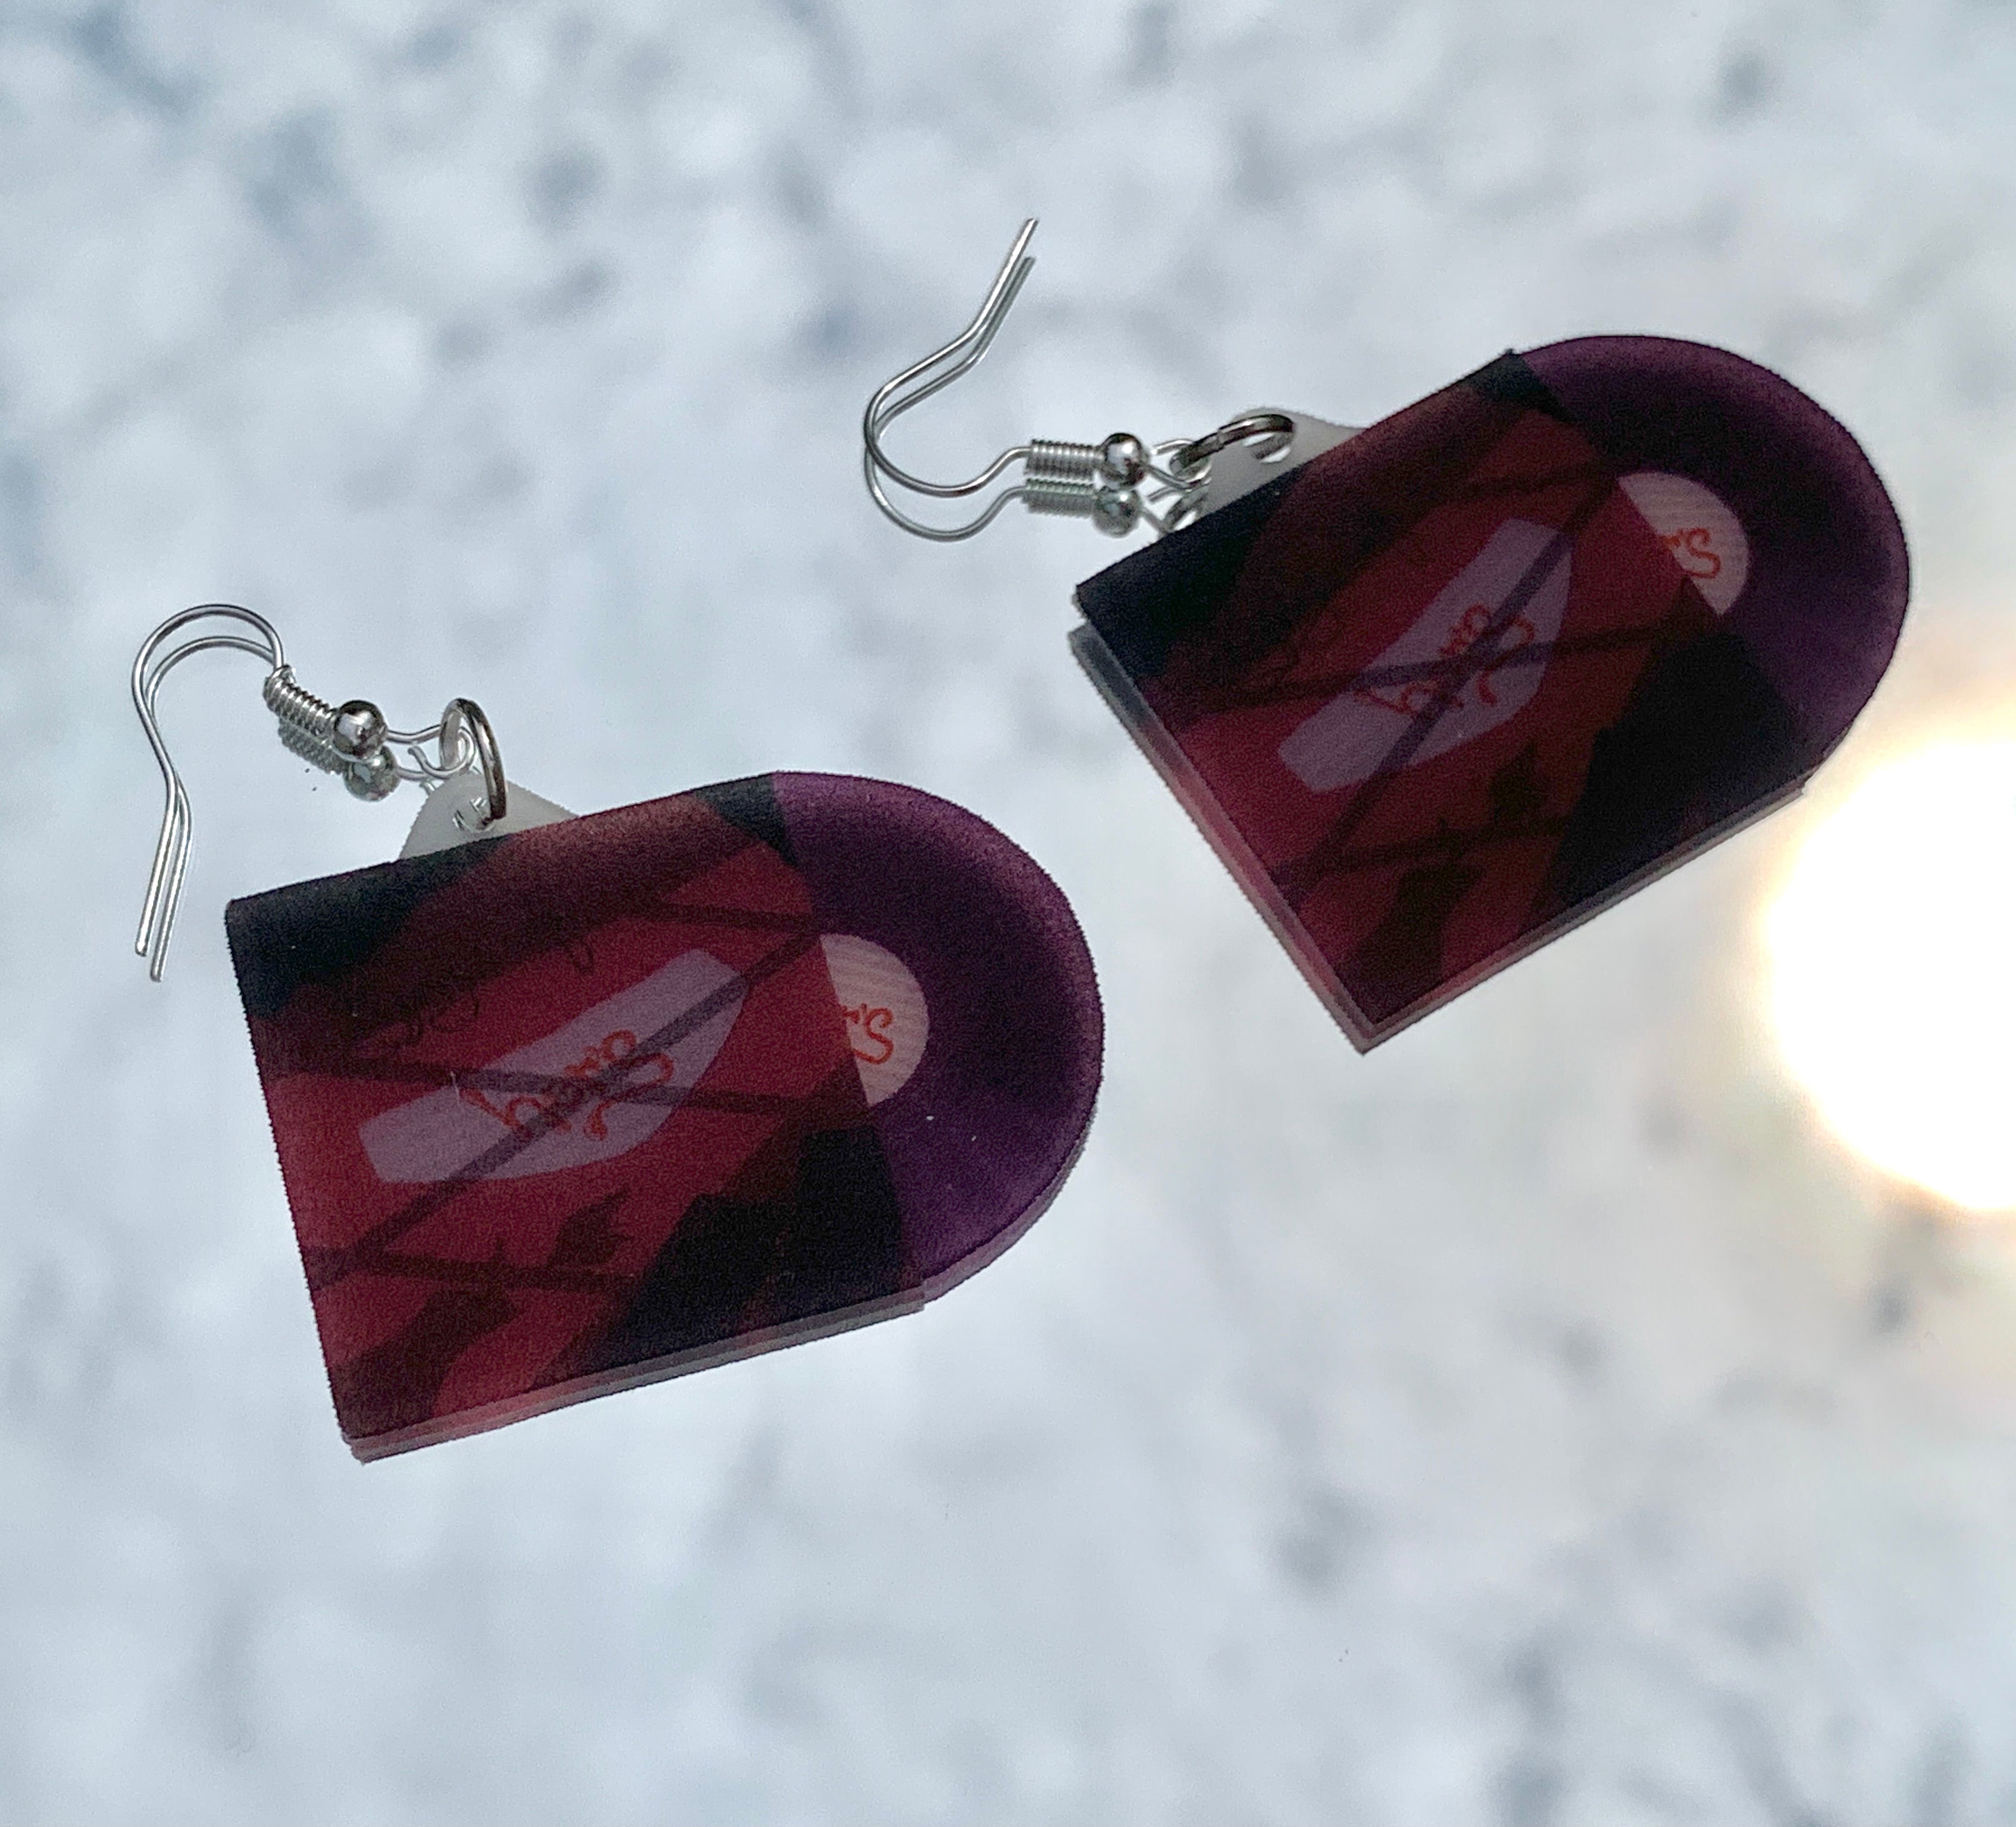 Her's Collection of Vinyl Albums Handmade Earrings!